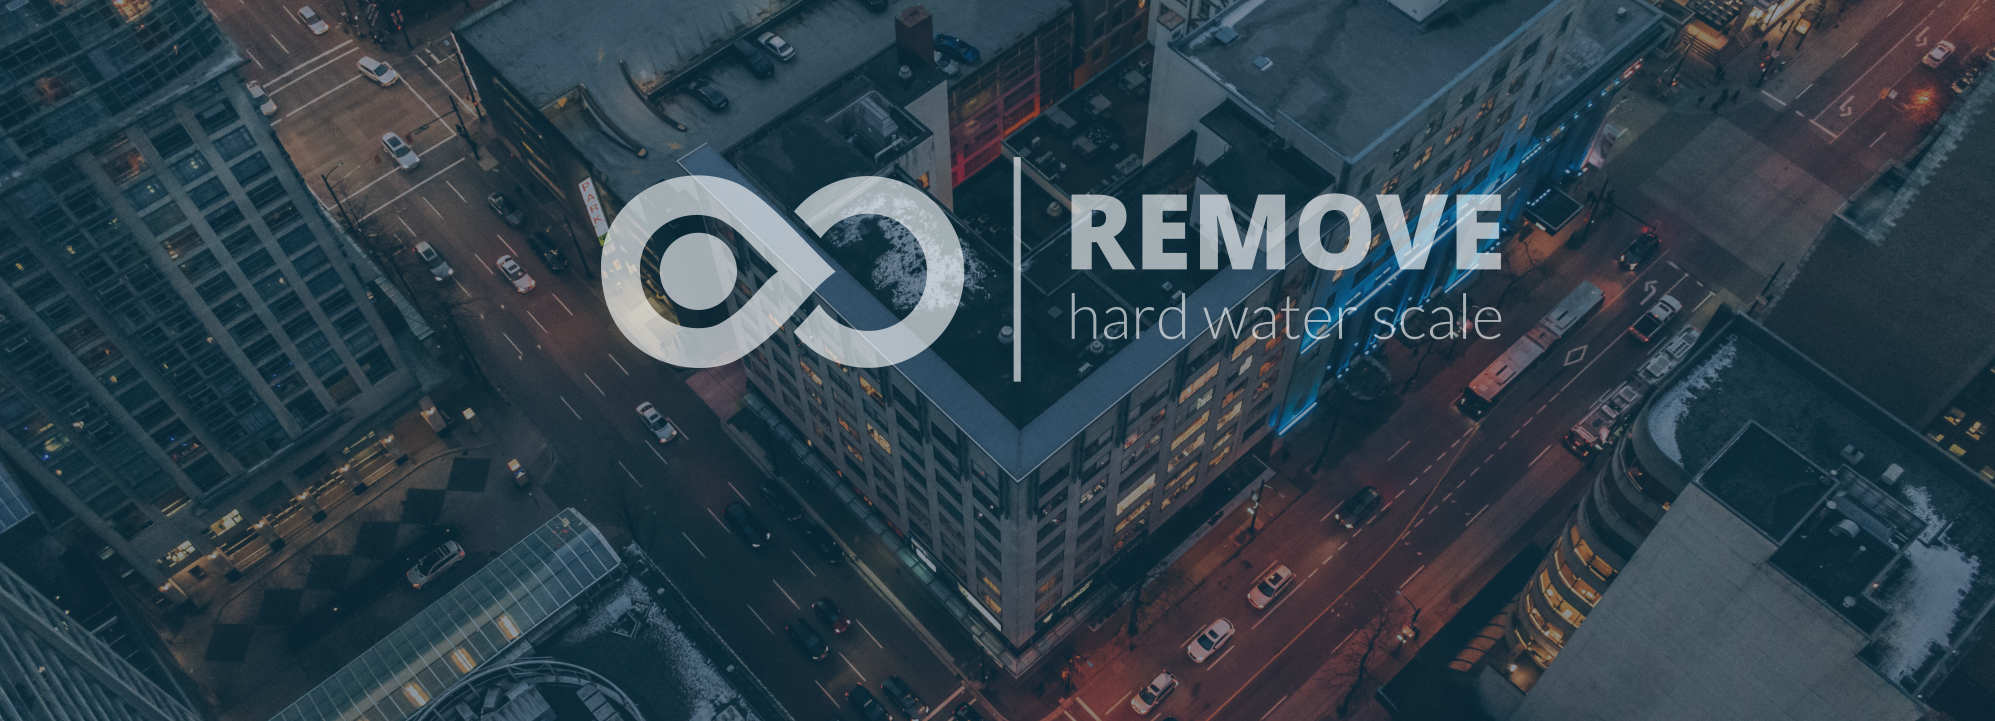 remove hard water scale city